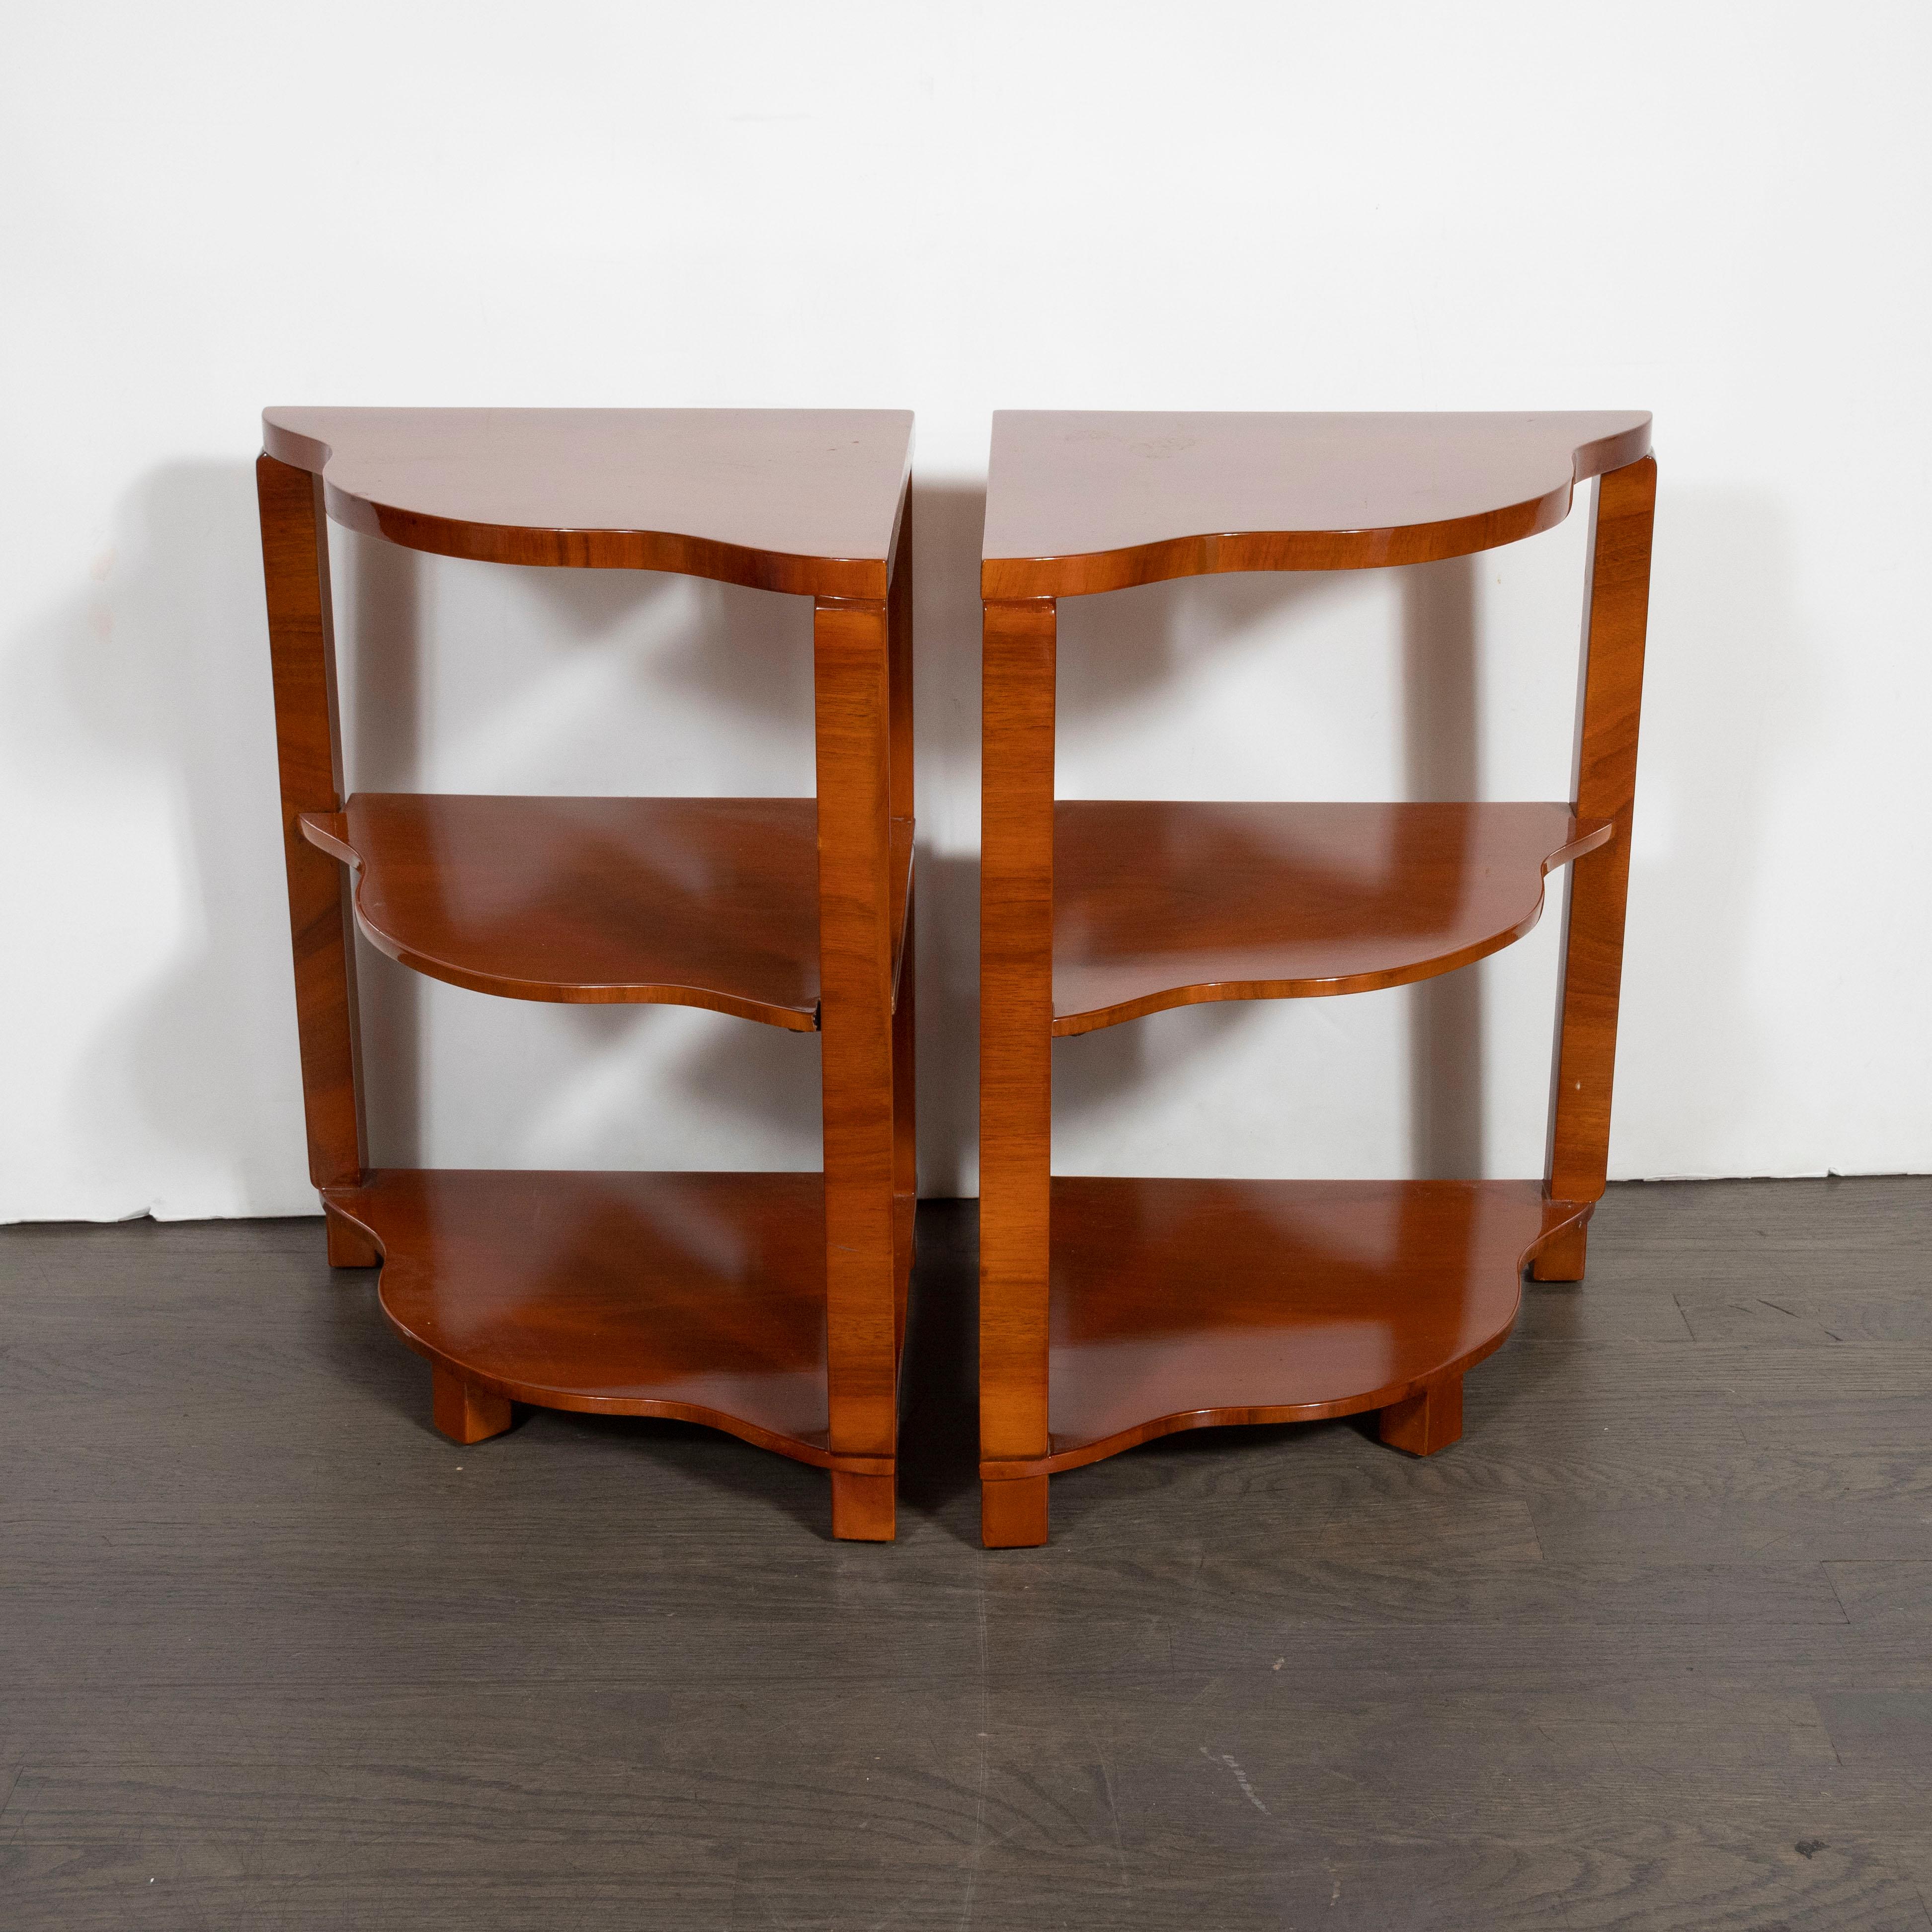 This elegant pair of Art Deco side/ end tables were realized in France, circa 1930. They feature two straight sides that adjoin at a right angle while one offers undulating curves, lending them the moniker of 